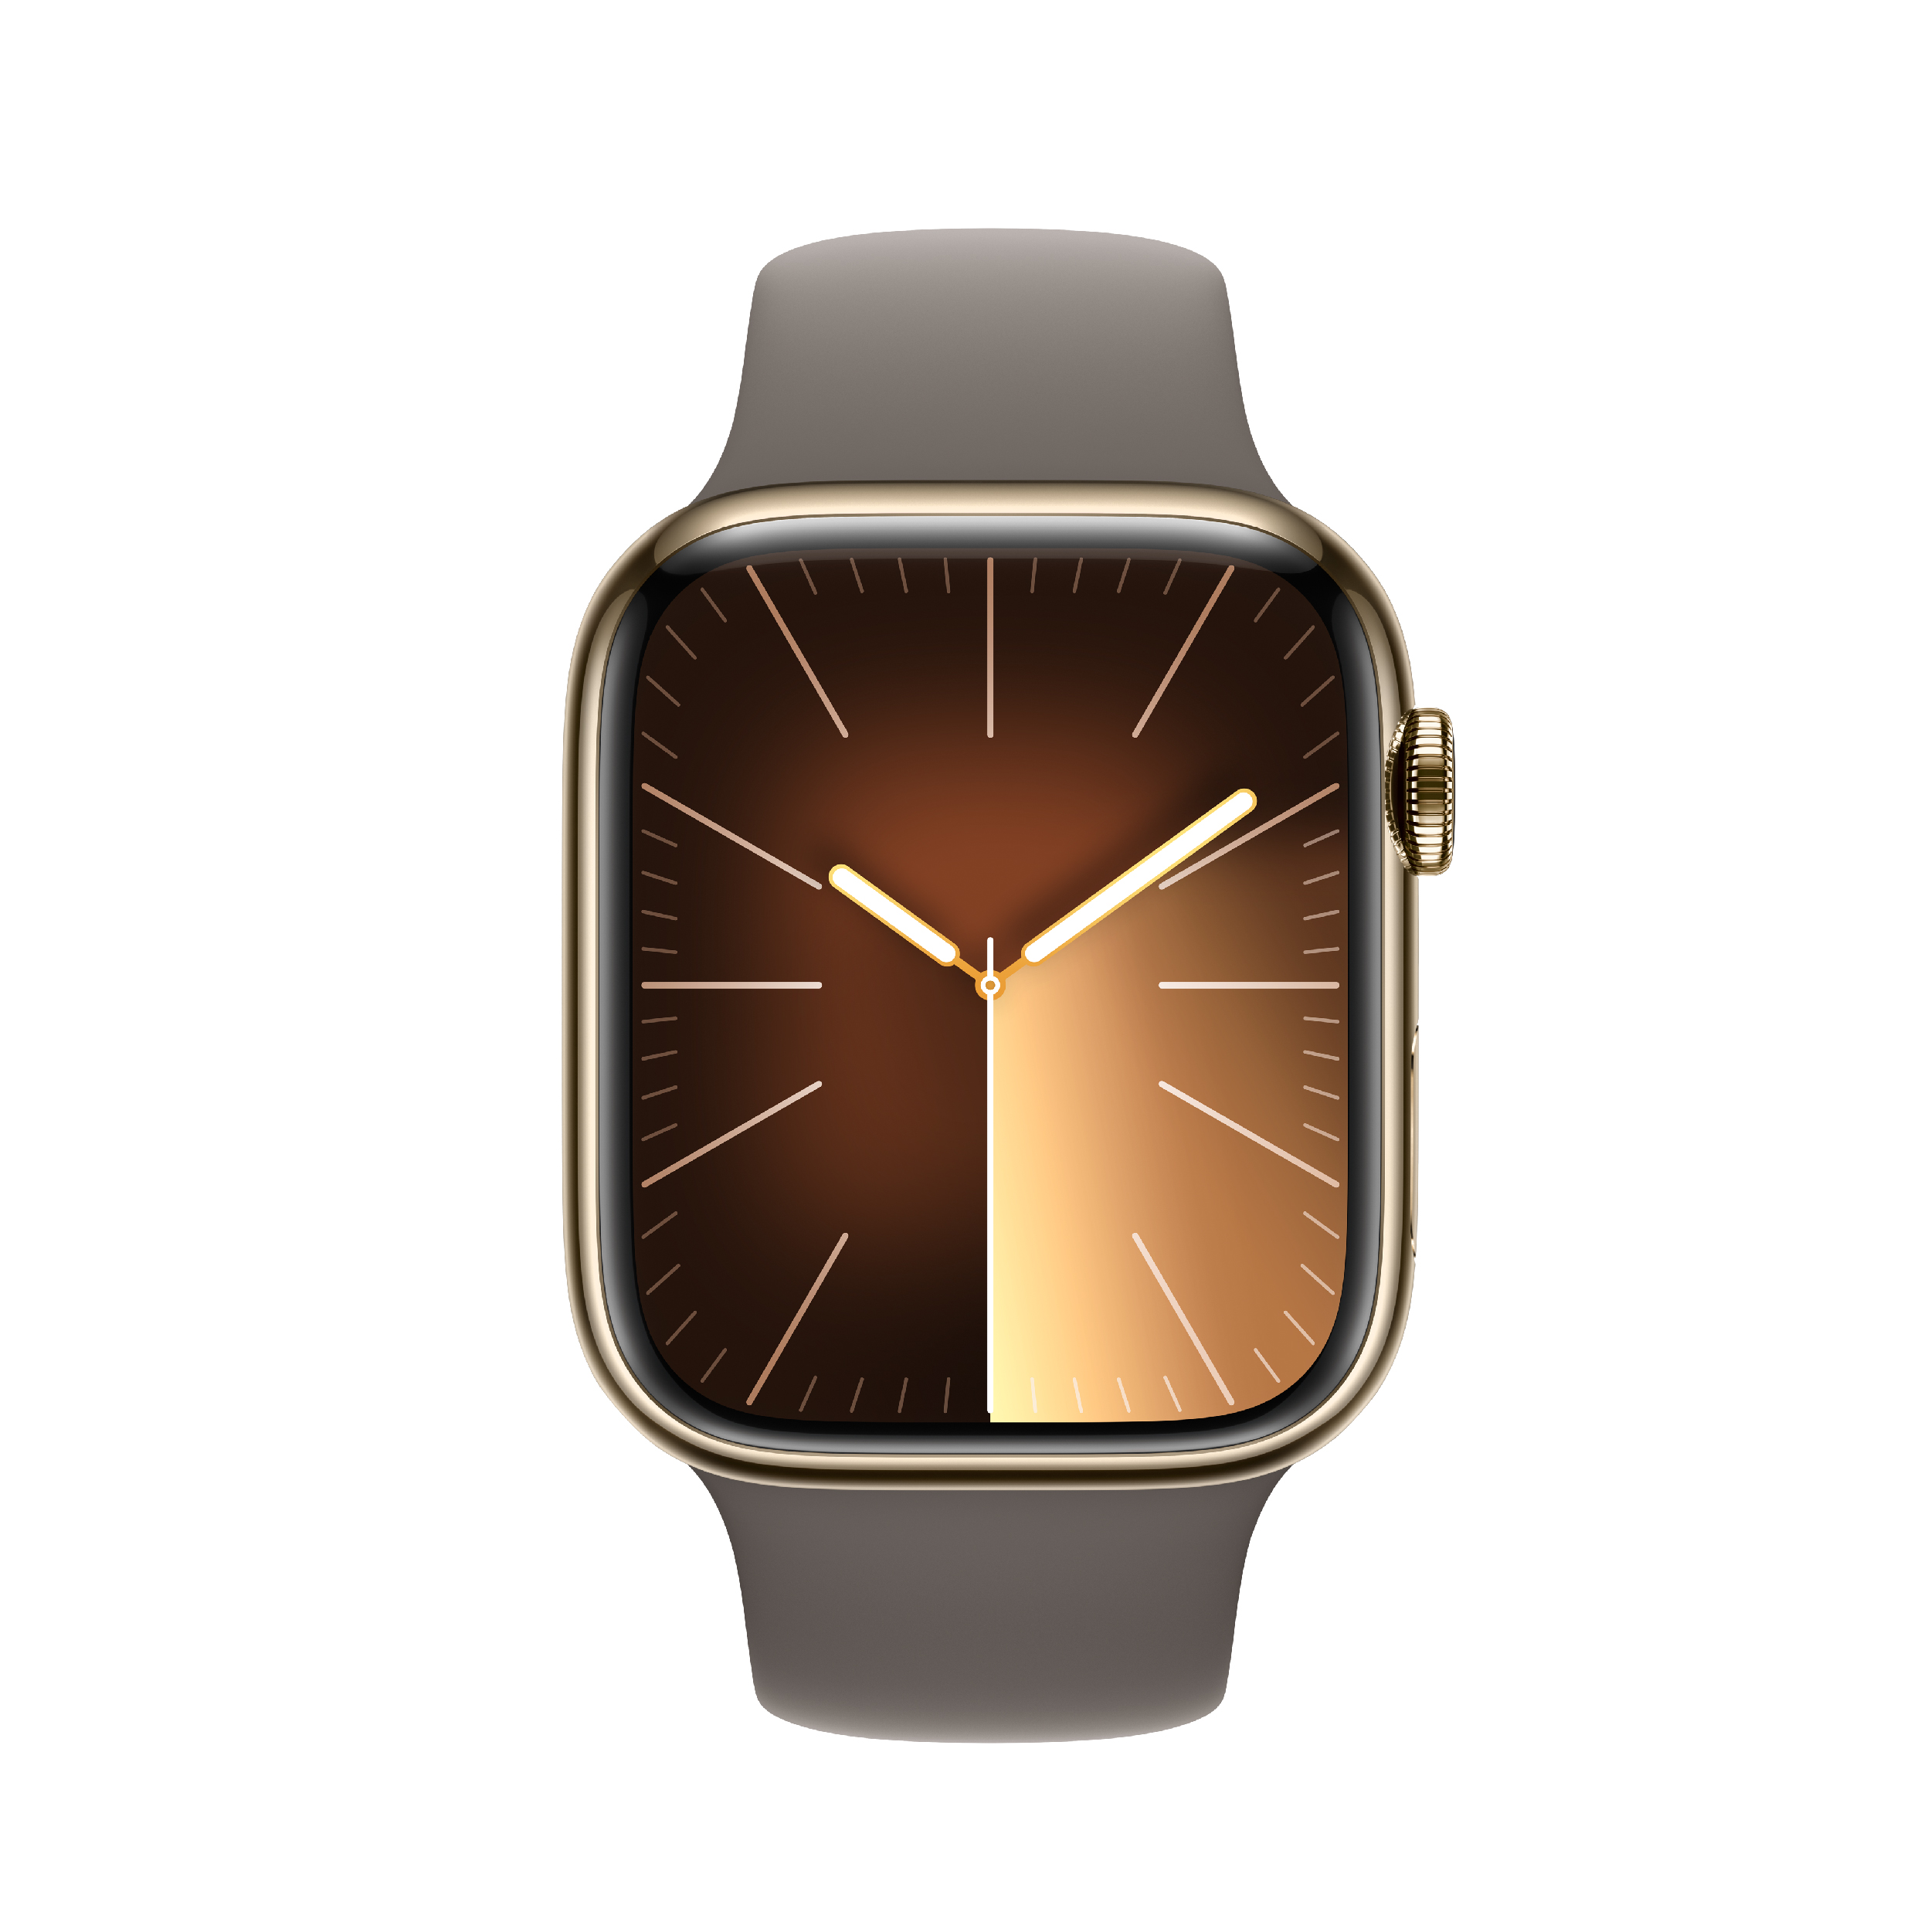 APPLE Smartwatch Series 9 GPS + Cellular 41mm, Gold Stainless Steel with Clay Sport Band Strap